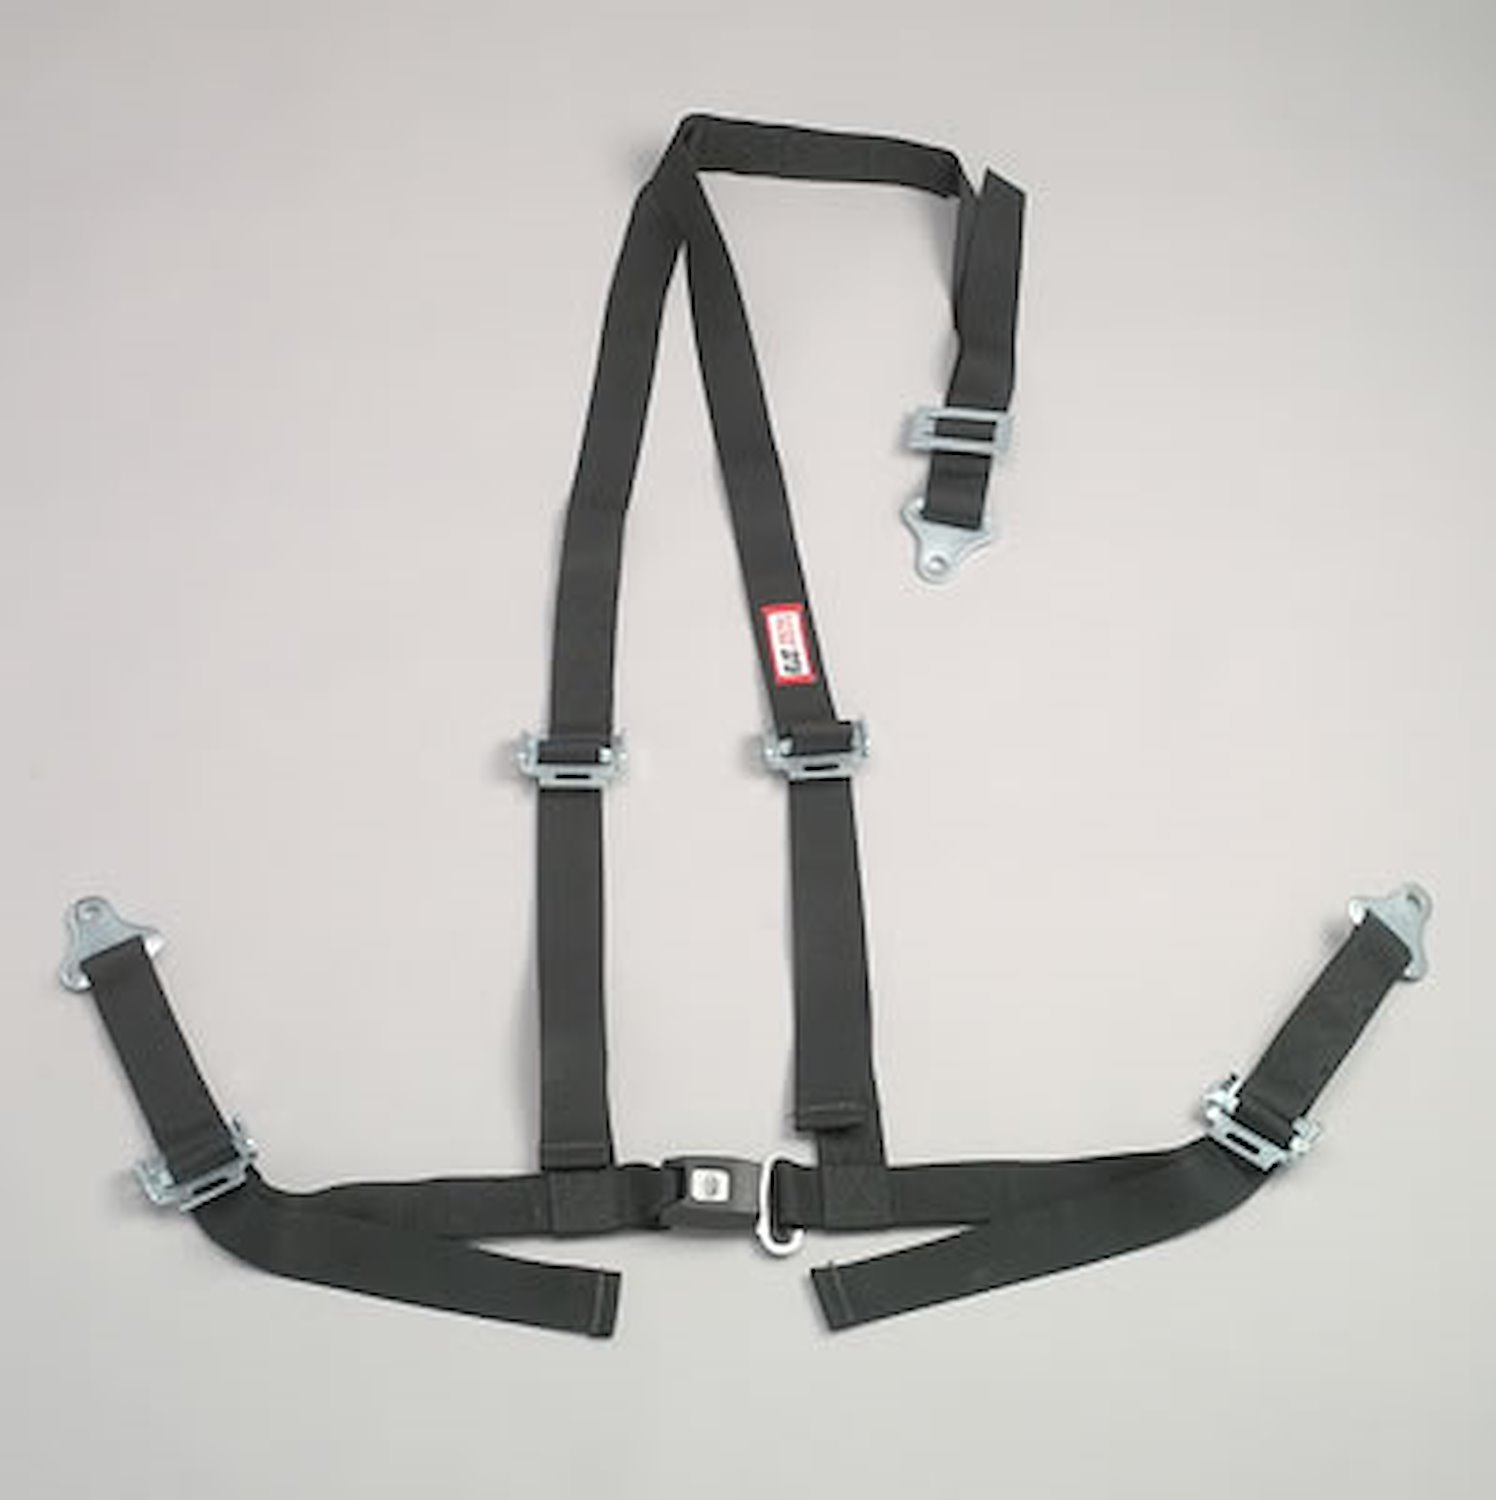 NON-SFI B&T HARNESS 2 PULL UP Lap Belt SNAP 2 S. H. Individual FLOOR Mount WRAP/BOLT w/STERNUM STRAP GRAY